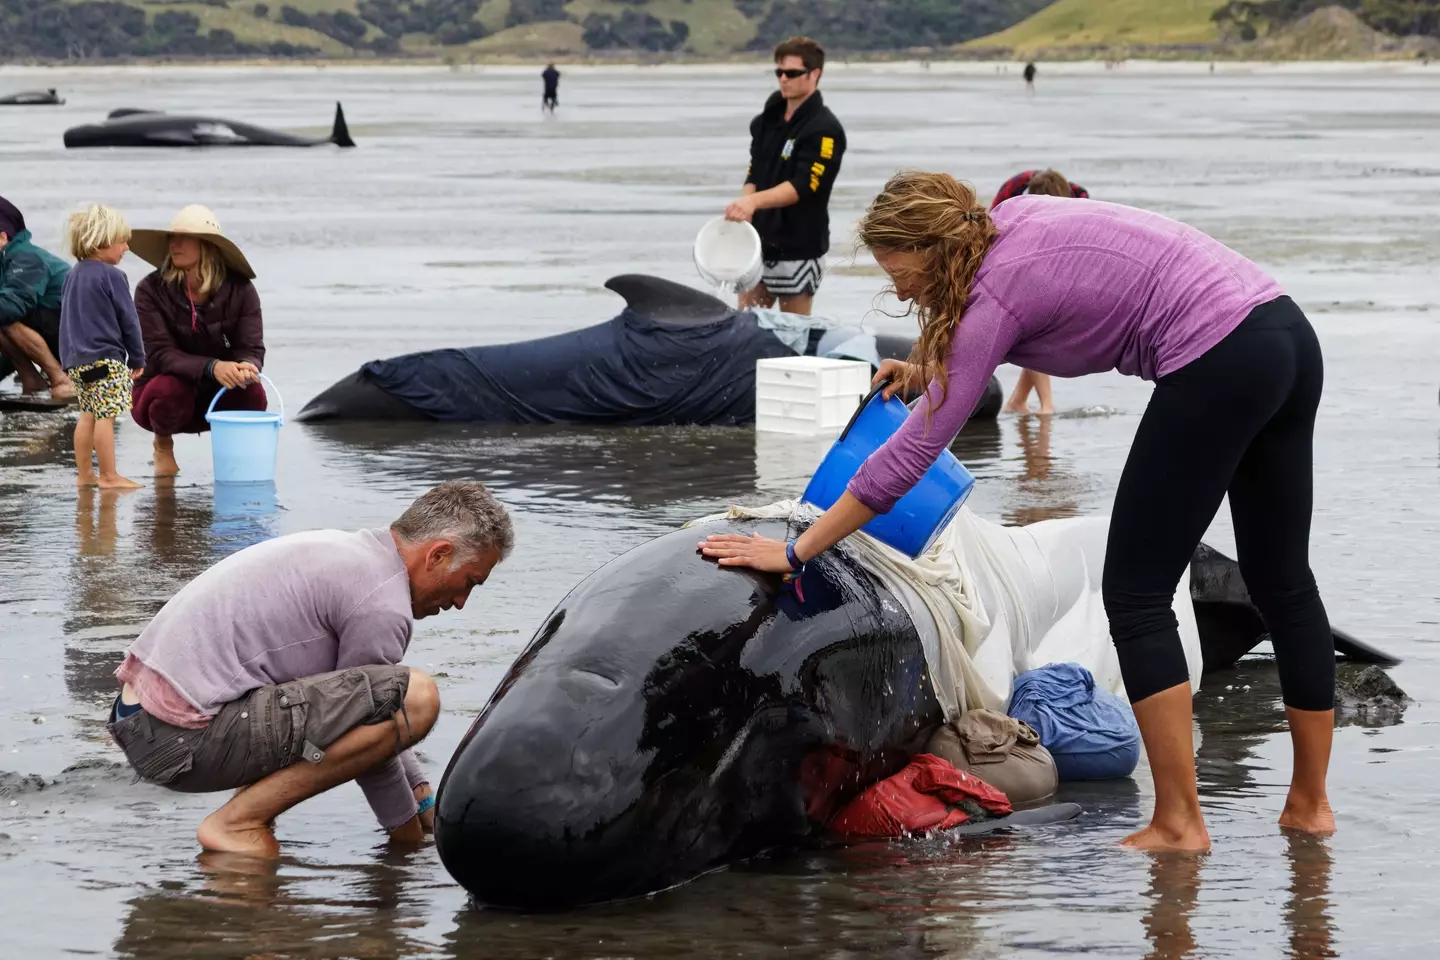 477 pilot whales have died after becoming stranded on two New Zealand beaches.